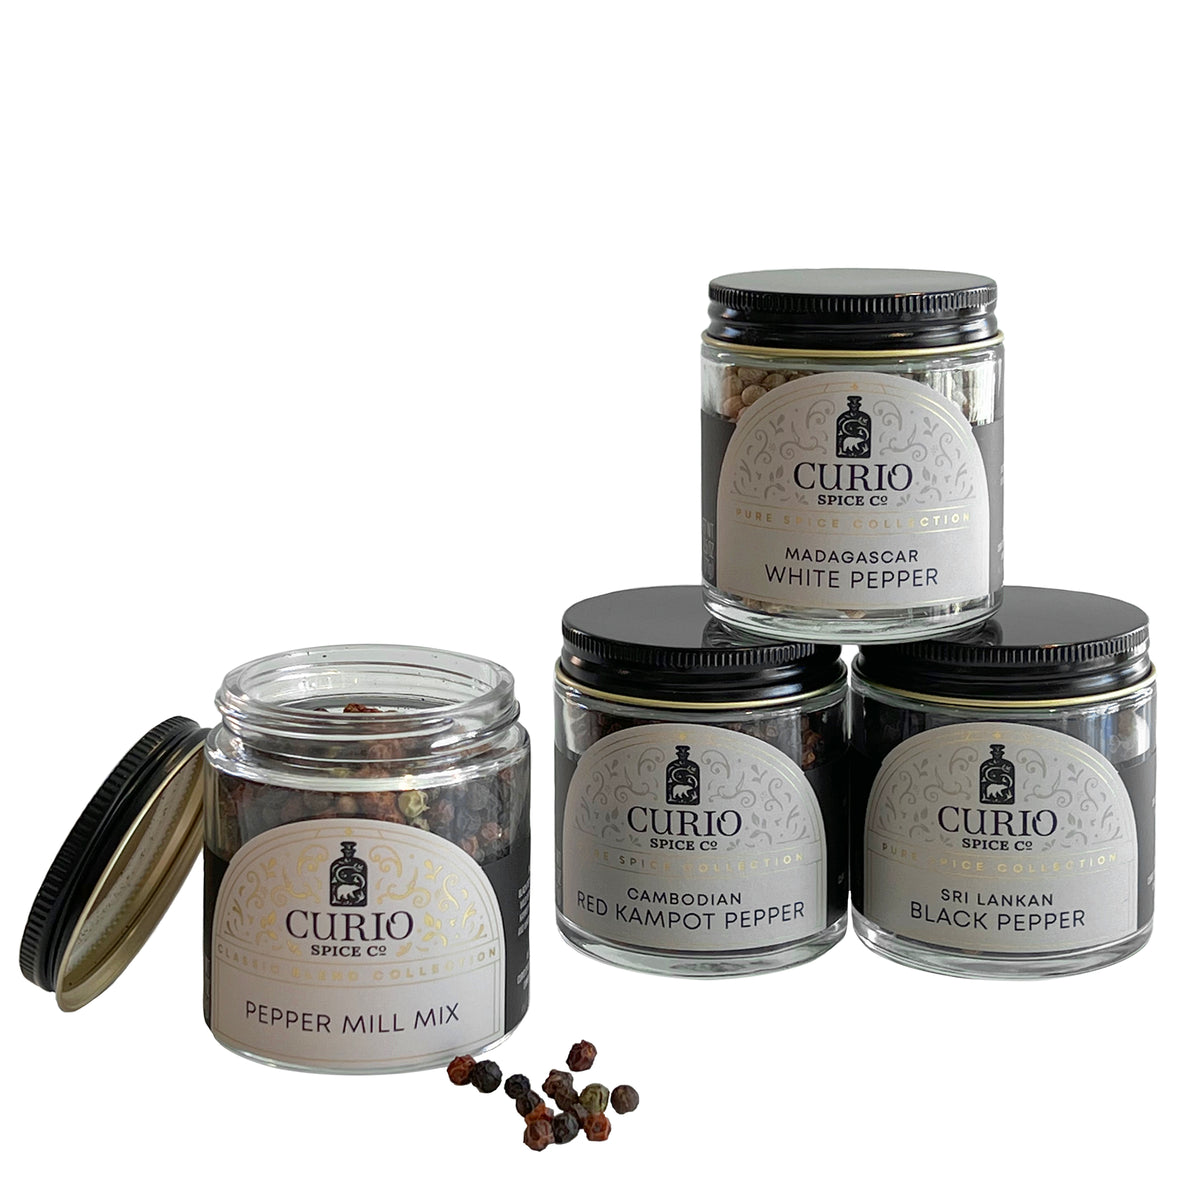 A curated Collection of Four Peppercorn Varieties from Curio Spice Co. for Caskata